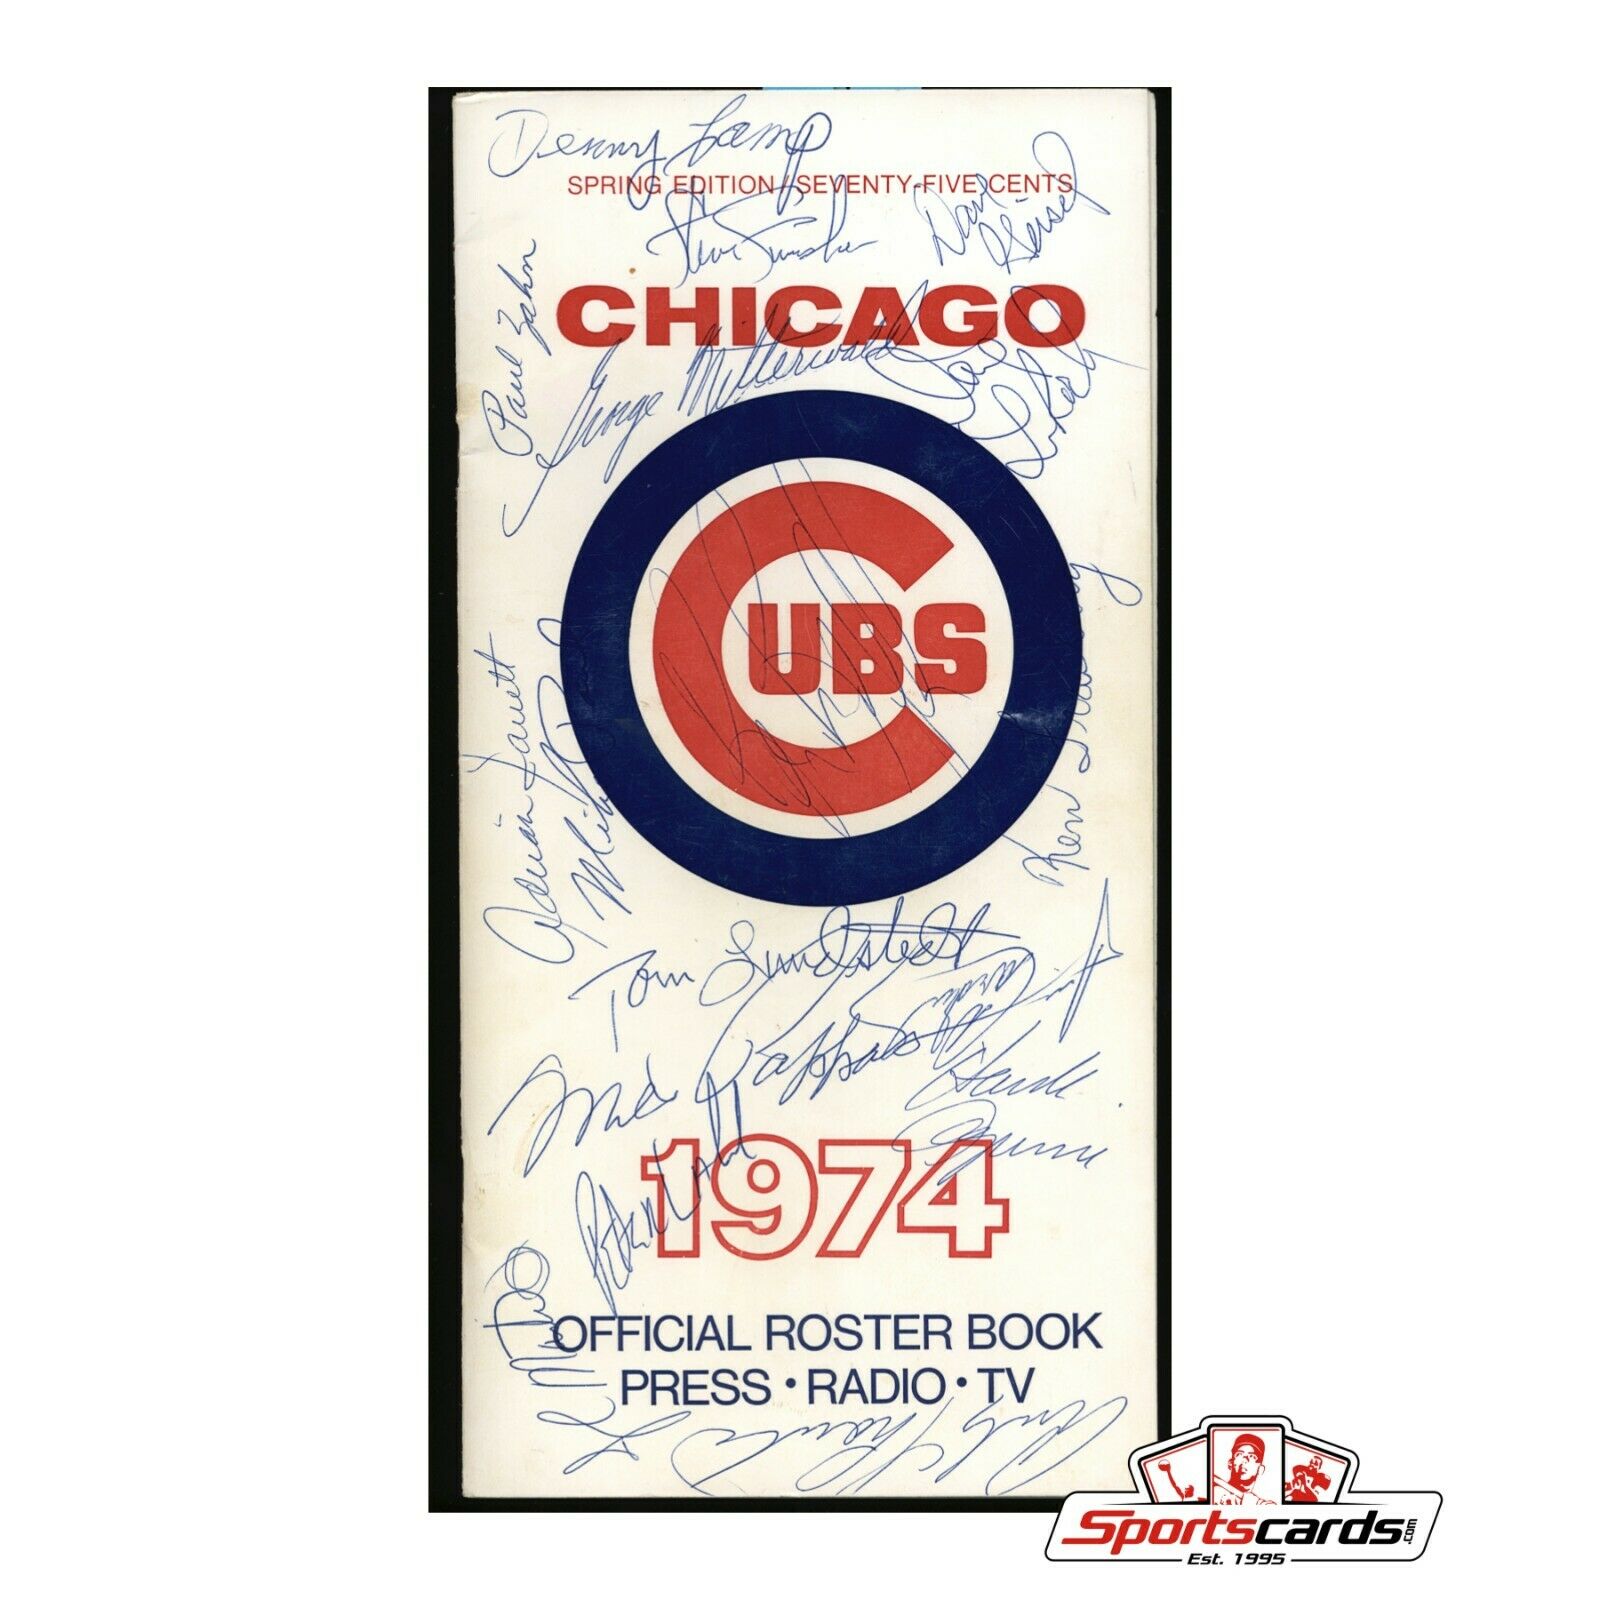 1974 Chicago Cubs Signed Press Roster Book 20 Signatures Williams Pappas